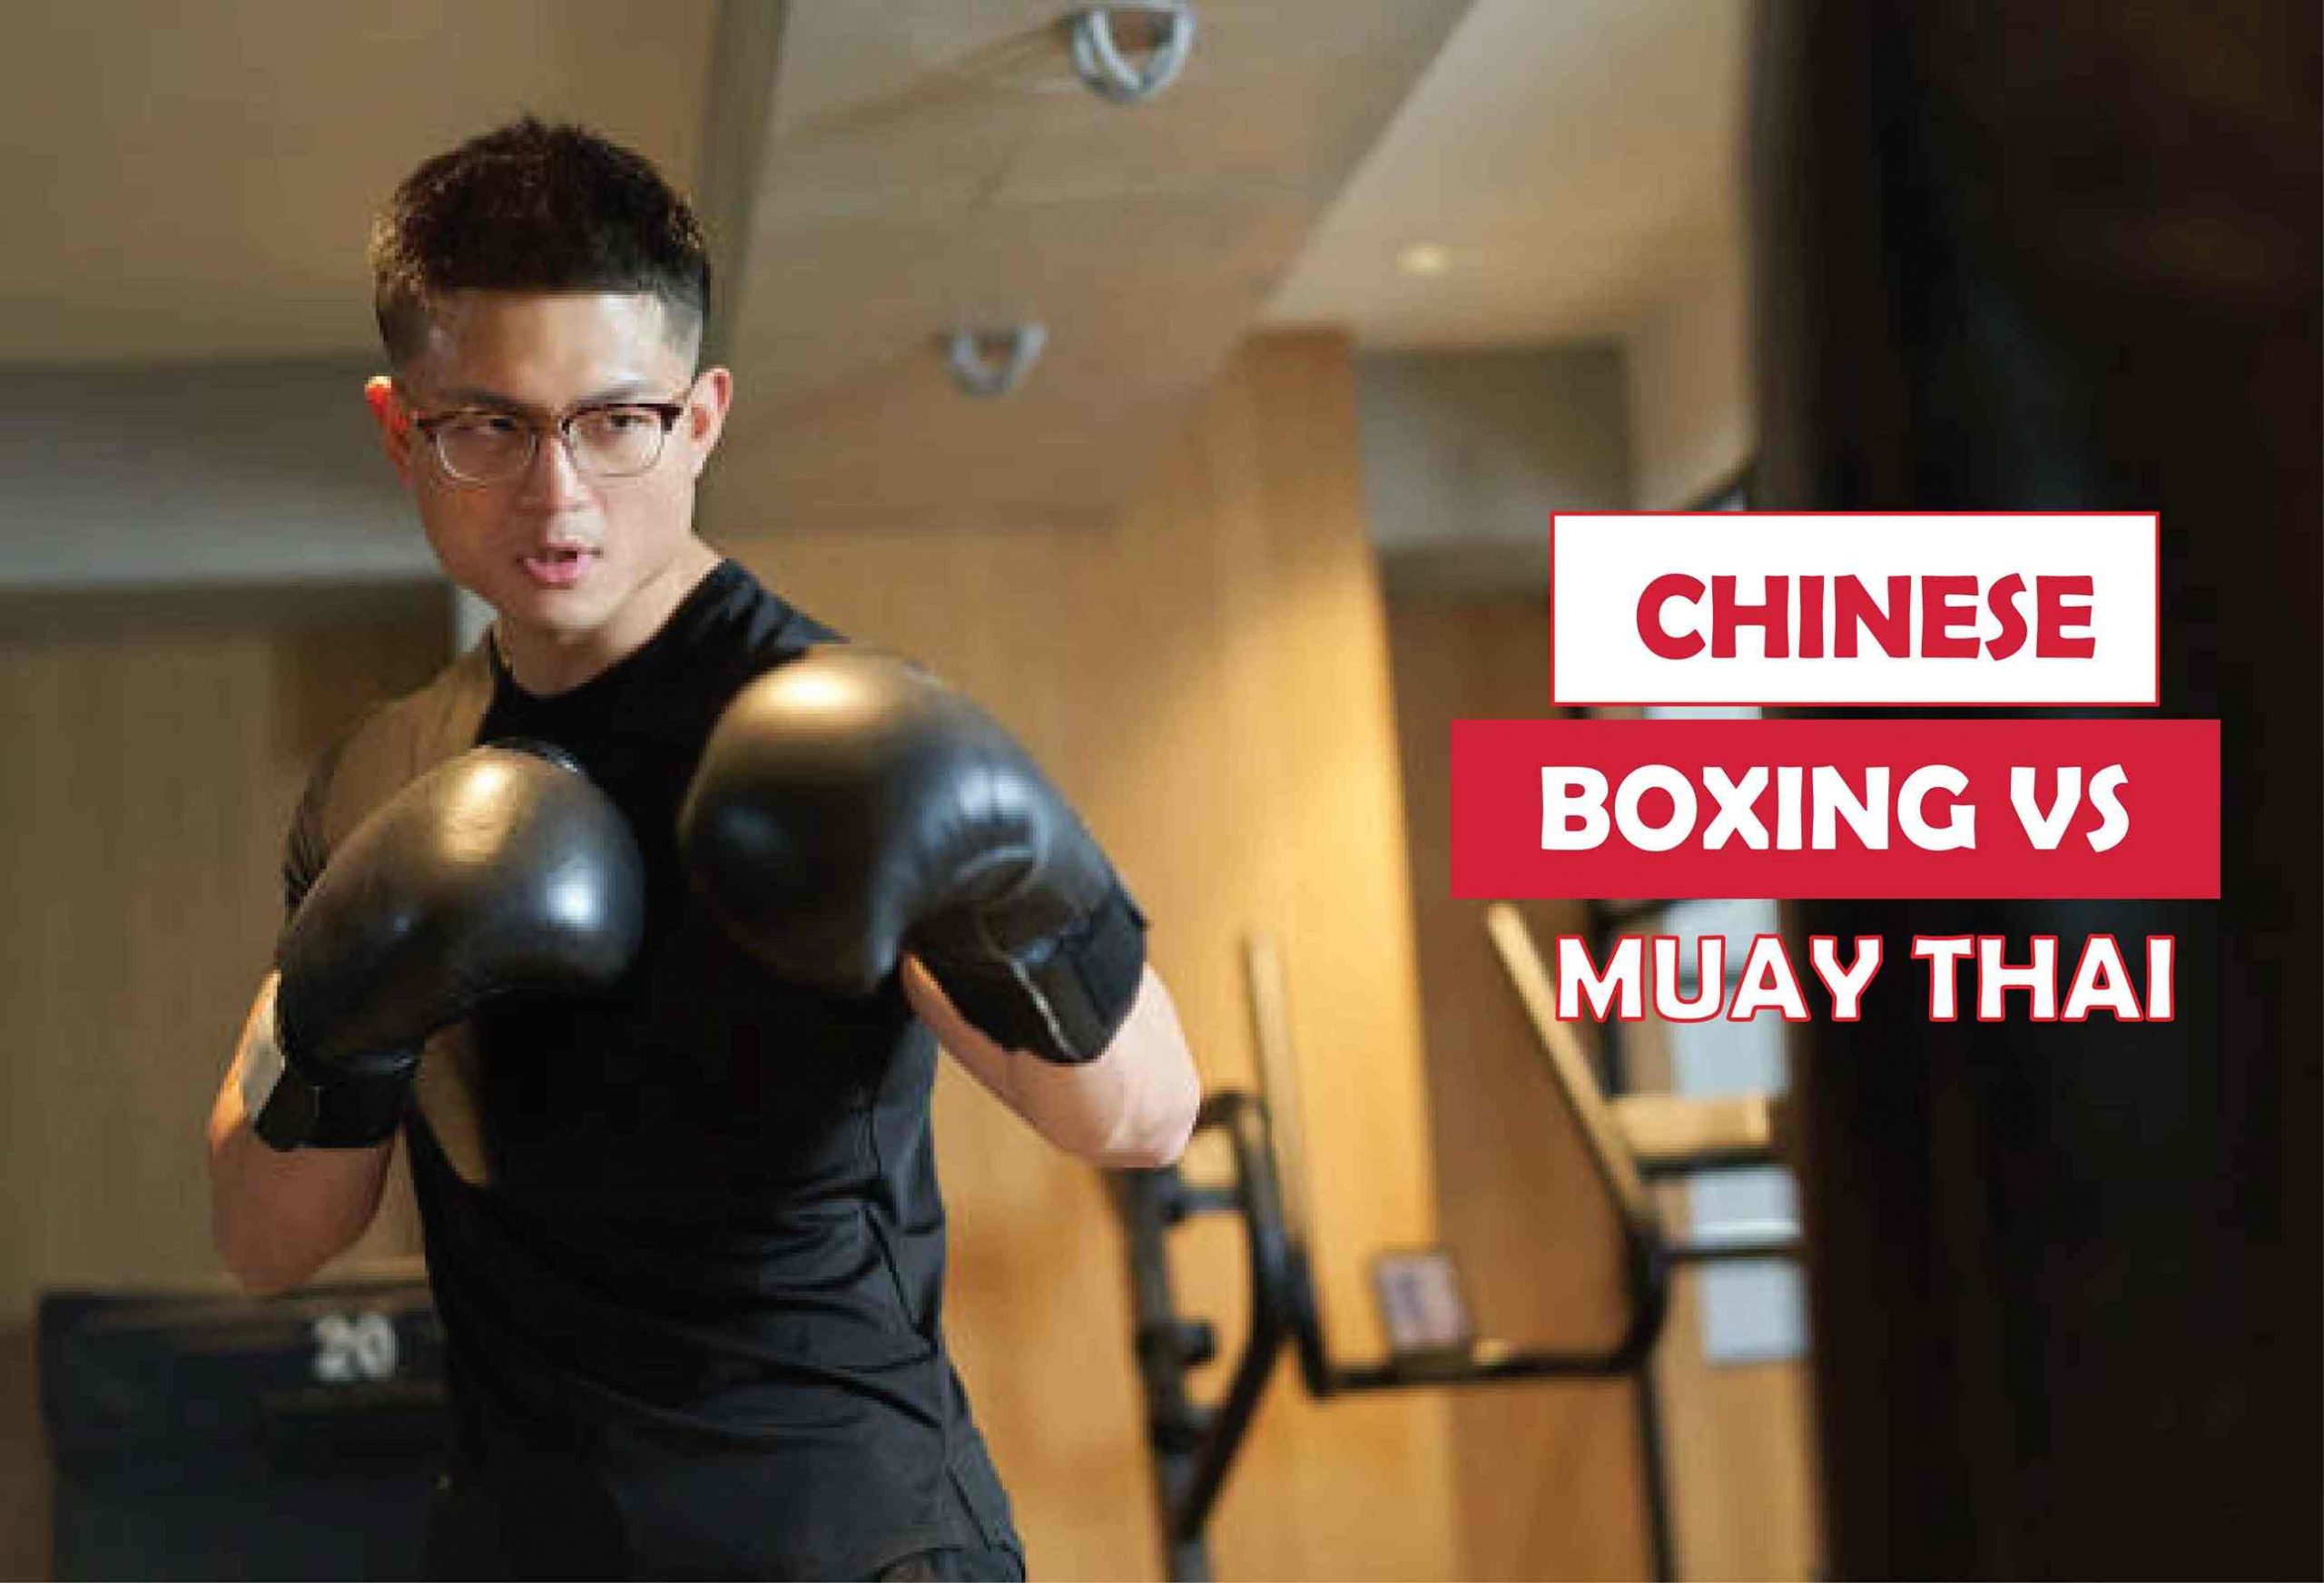 Chinese Boxing vs Muay Thai-Which One is Better